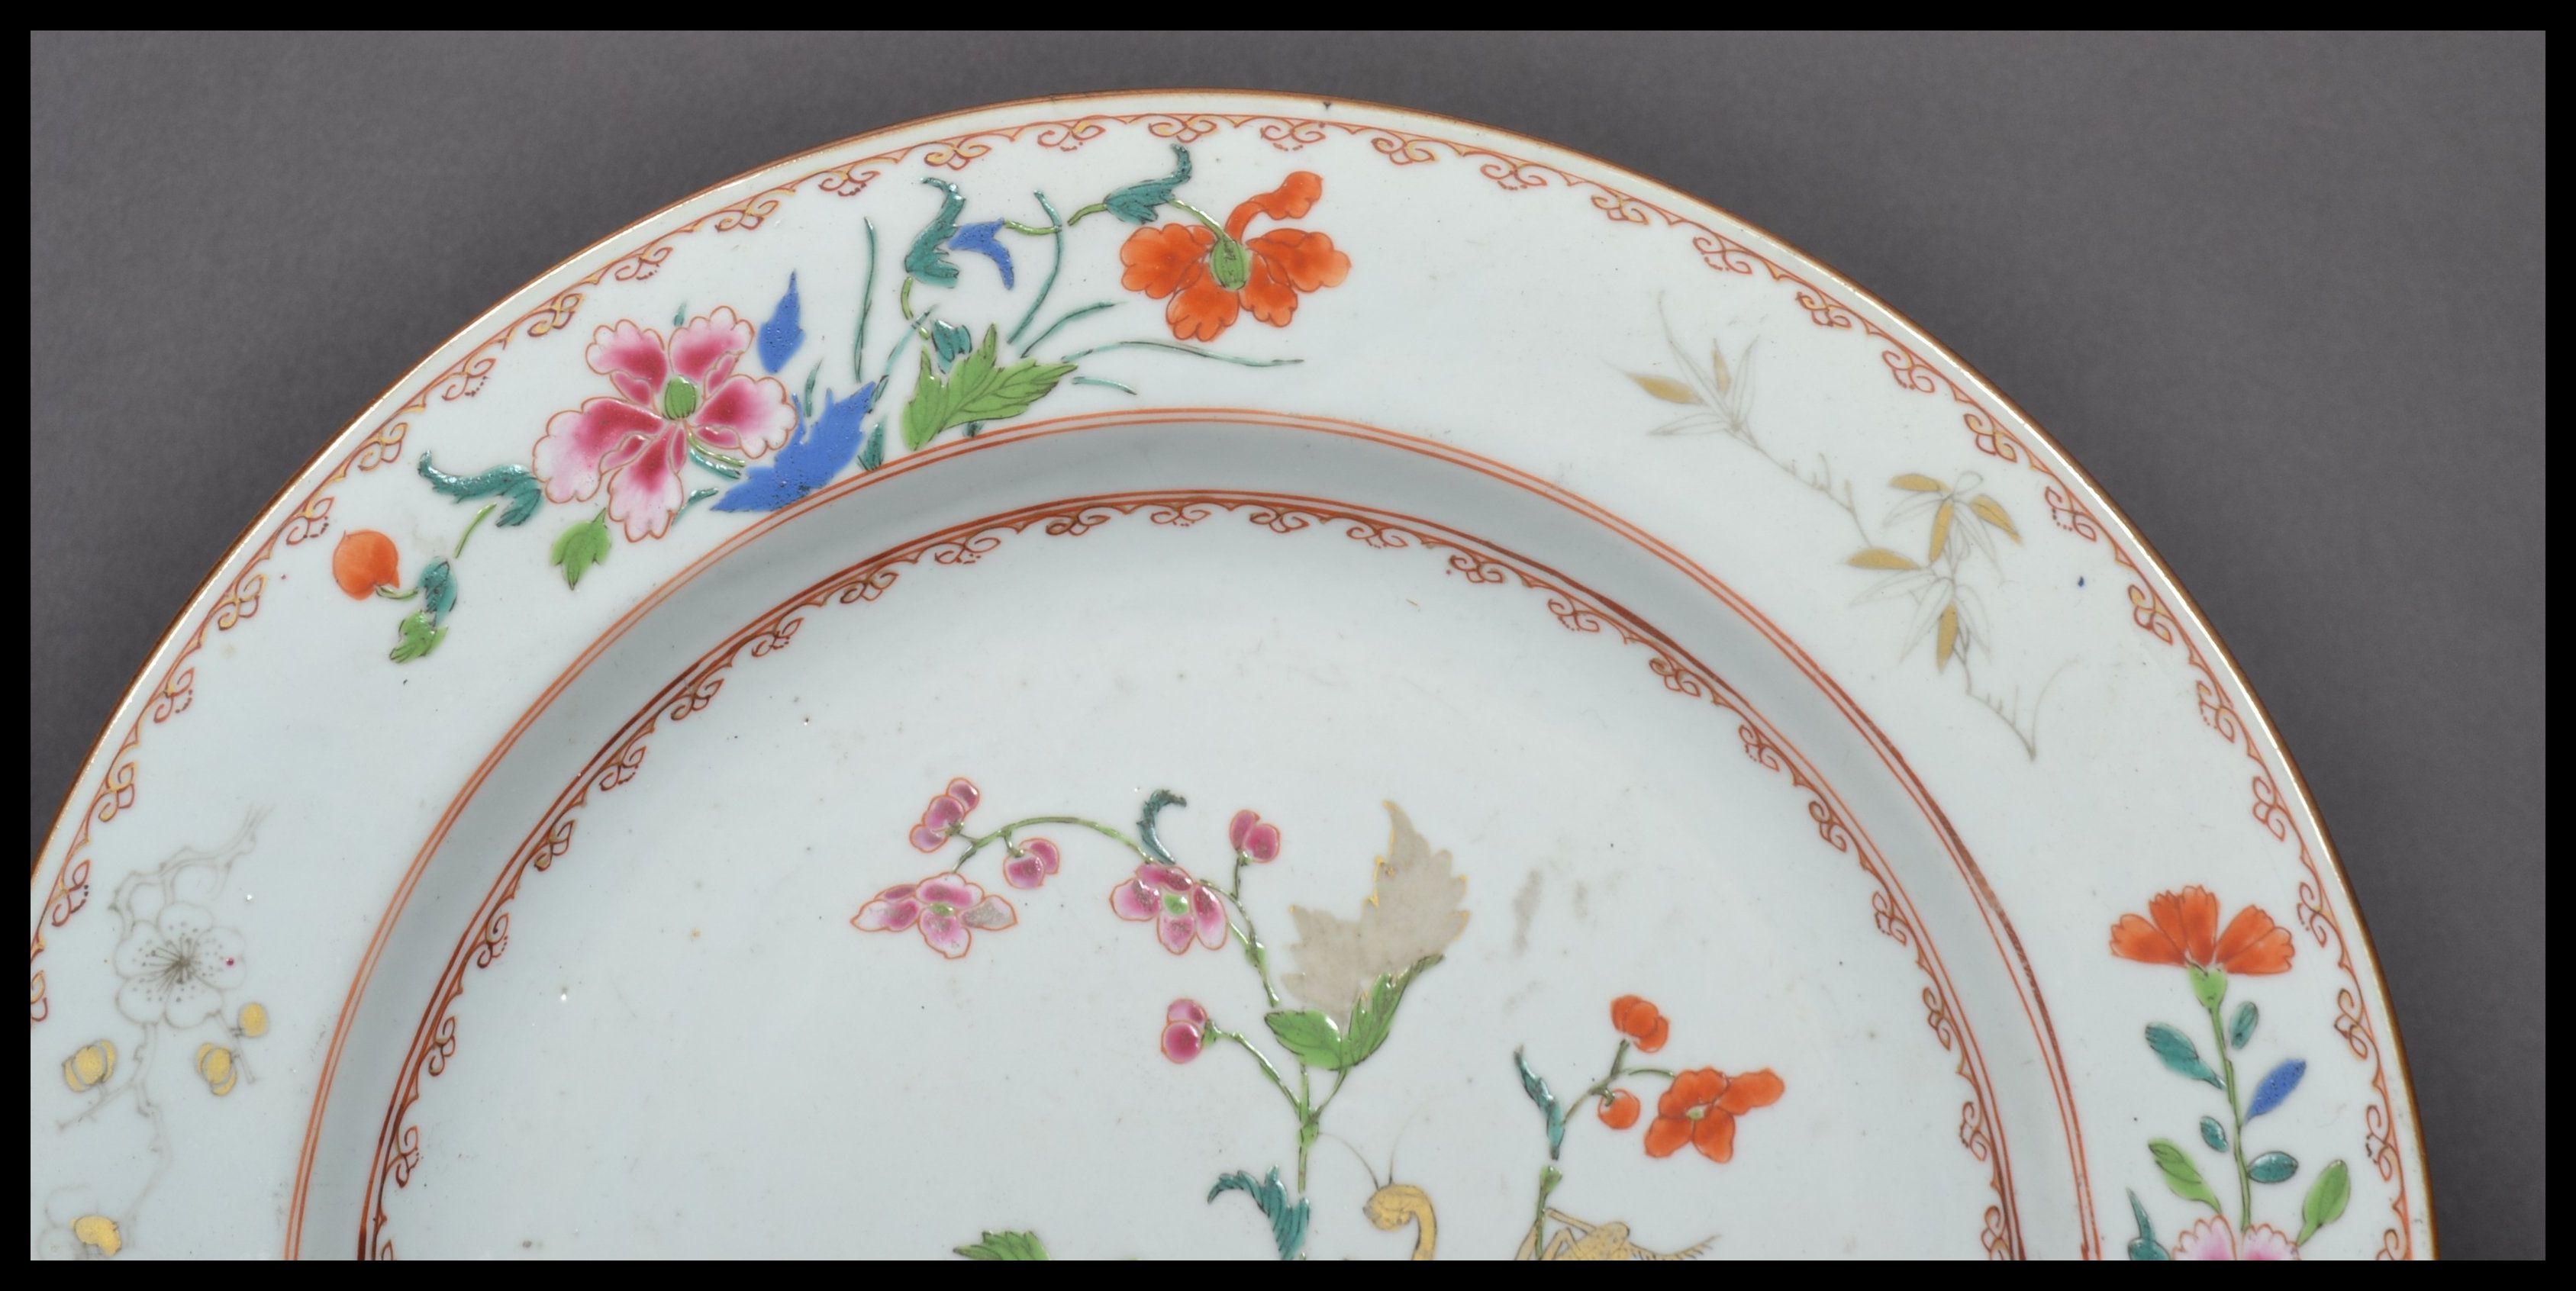 An 18th century Chinese Qing Long Famille Rose plate hand painted with enamels depicting floral - Image 3 of 8